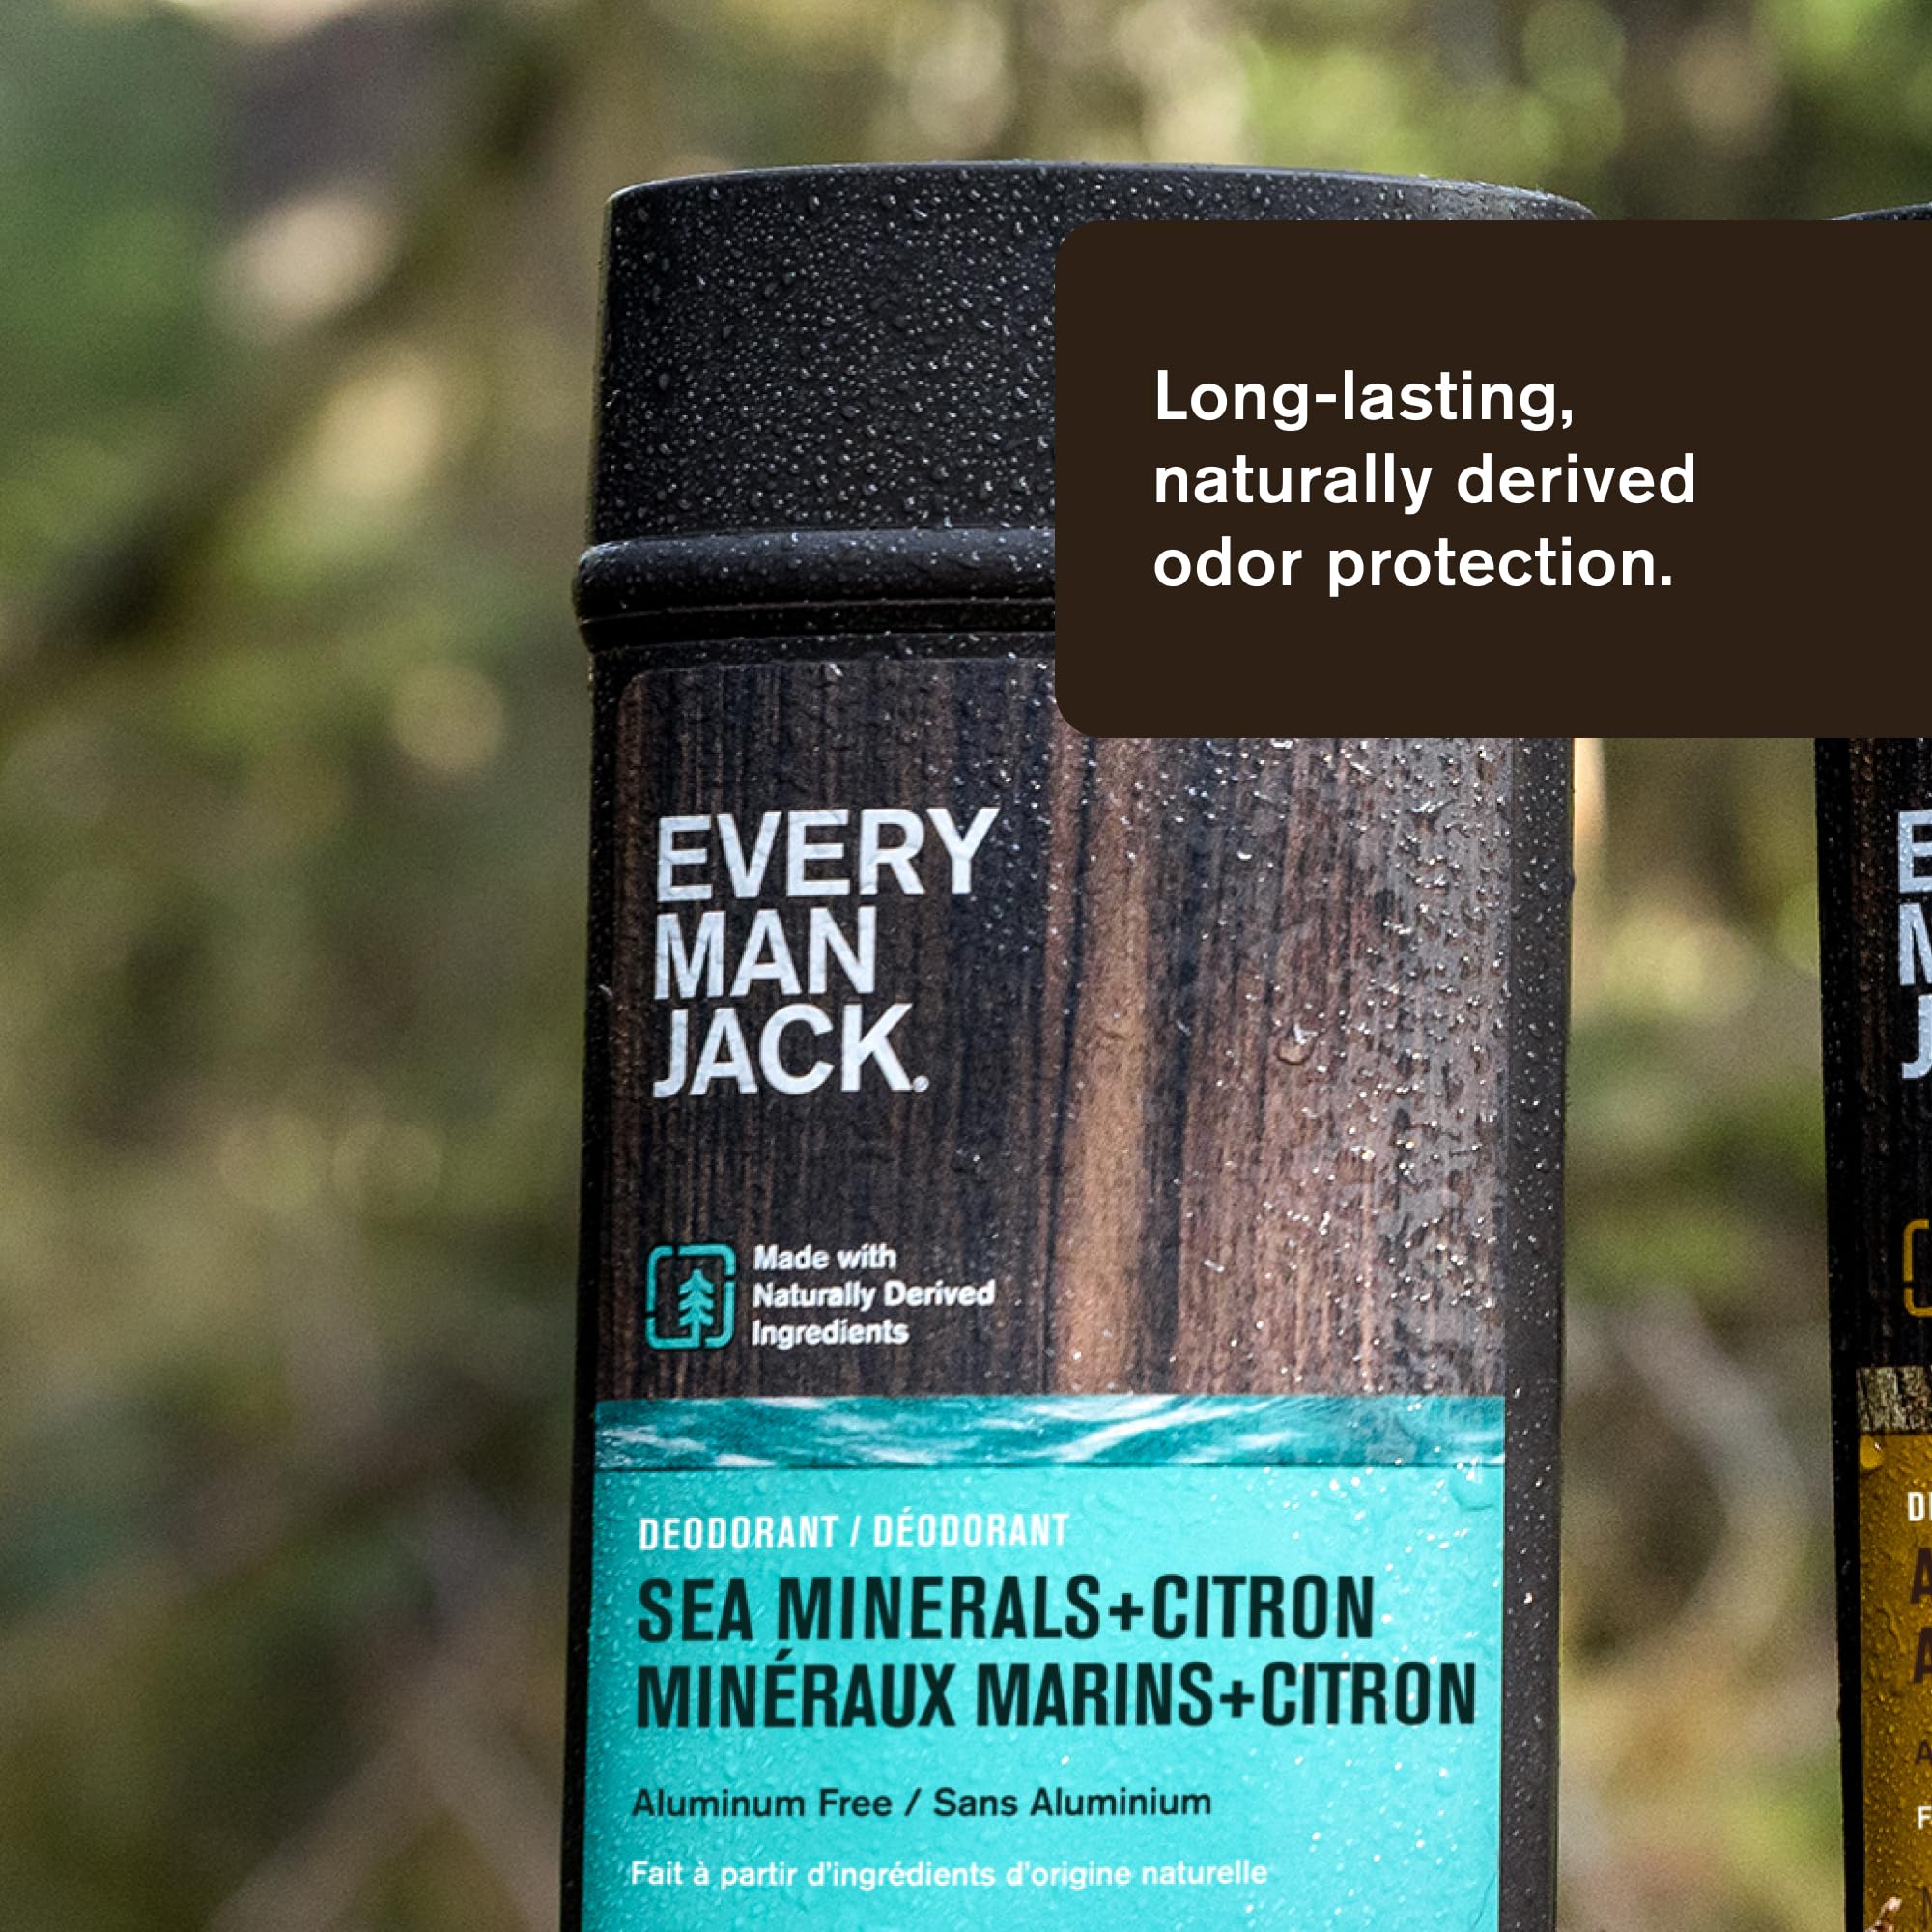 Every Man Jack Sea Minerals + Citron Men’s Aluminum Free Deodorant - Stay Fresh with Natural Deodorant For all Skin Types - Odor Crushing, Long Lasting, with Naturally Derived Ingredients - 3oz